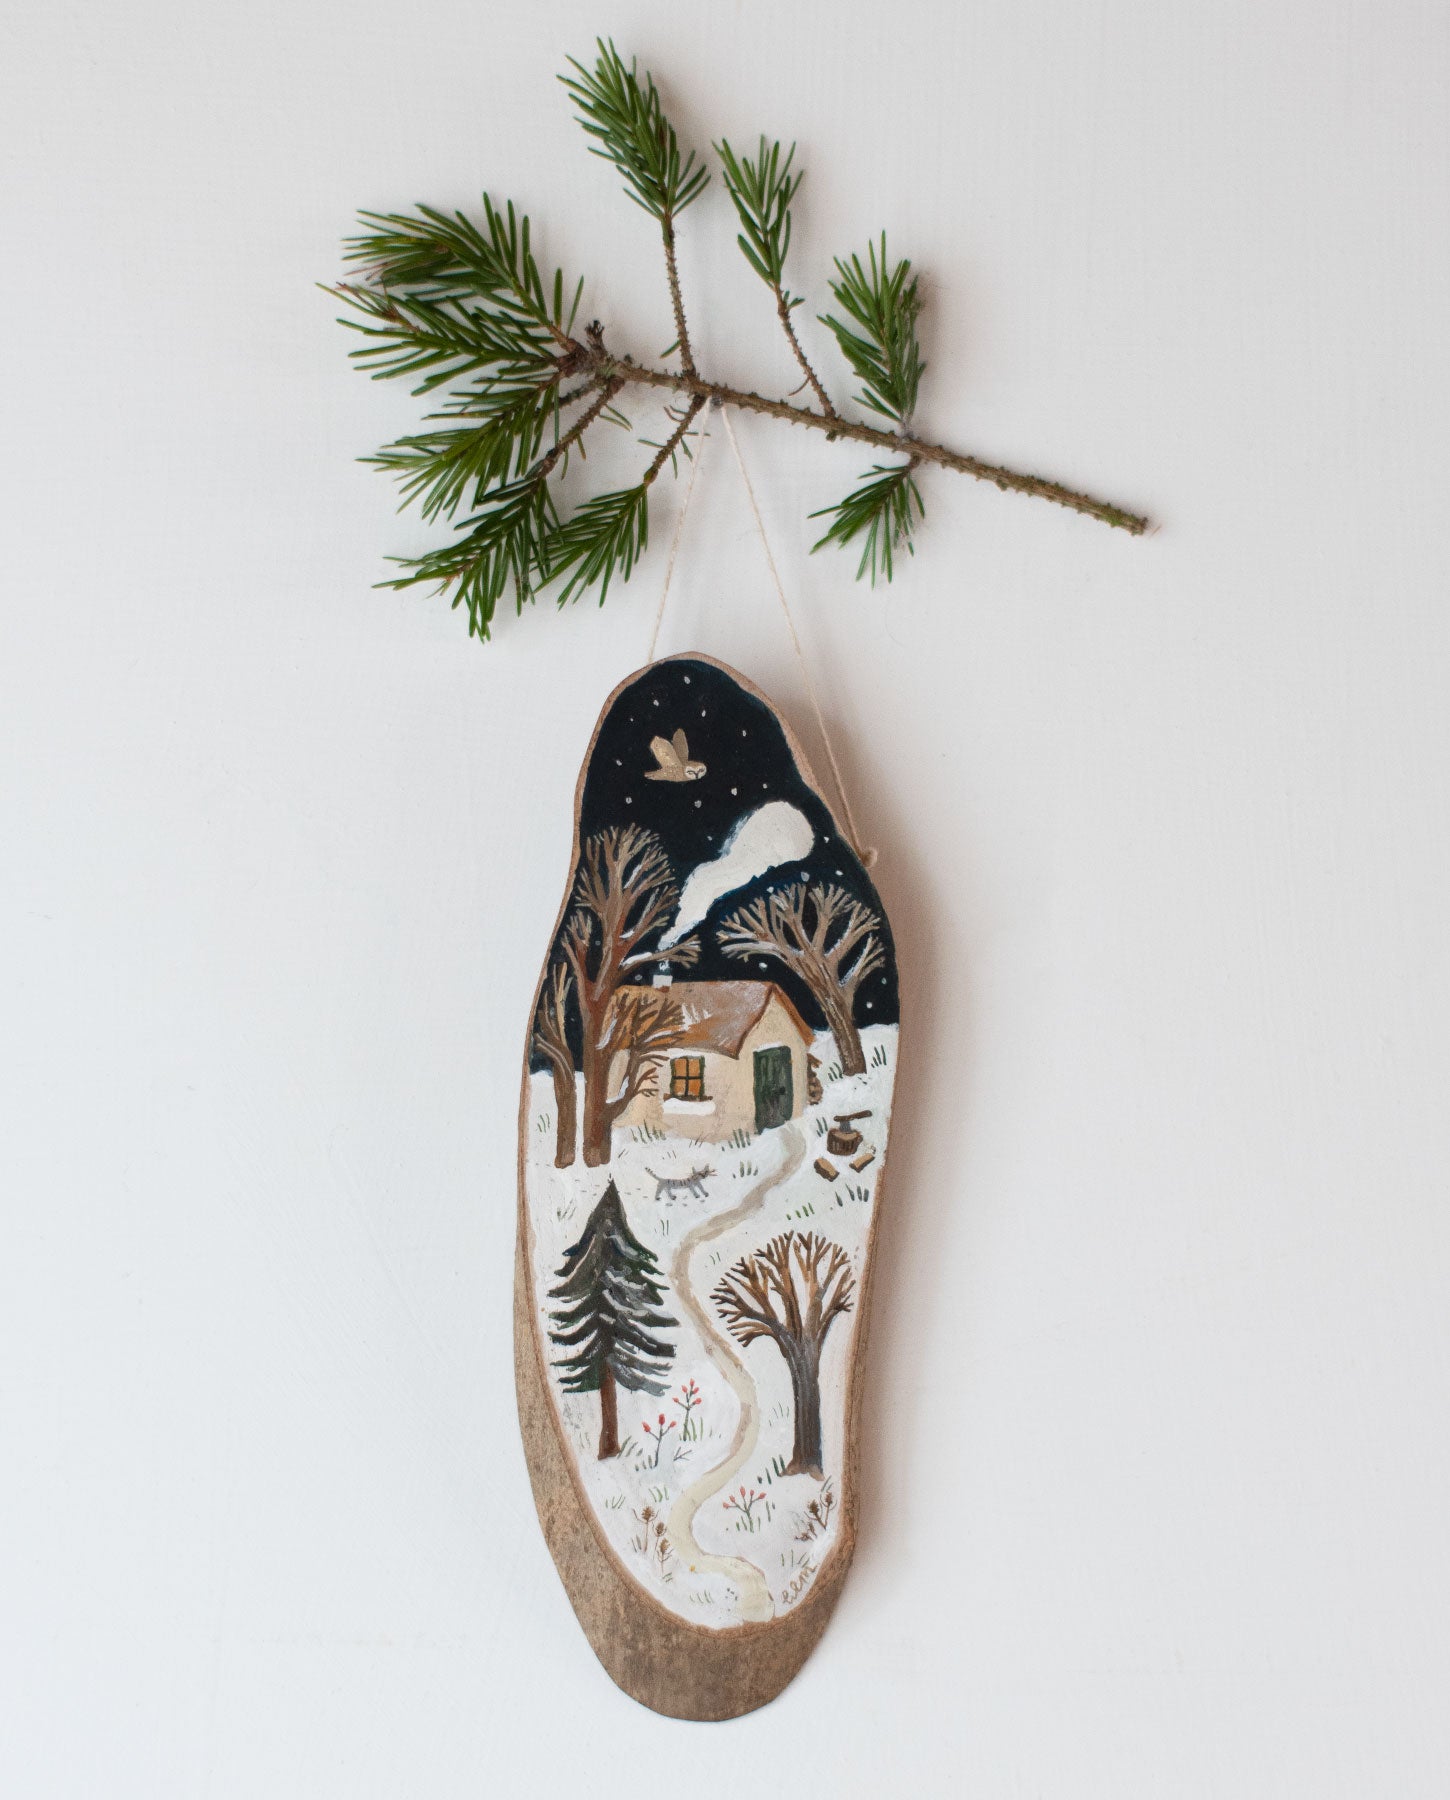 Home in the Woods - original miniature painting on a wooden slice